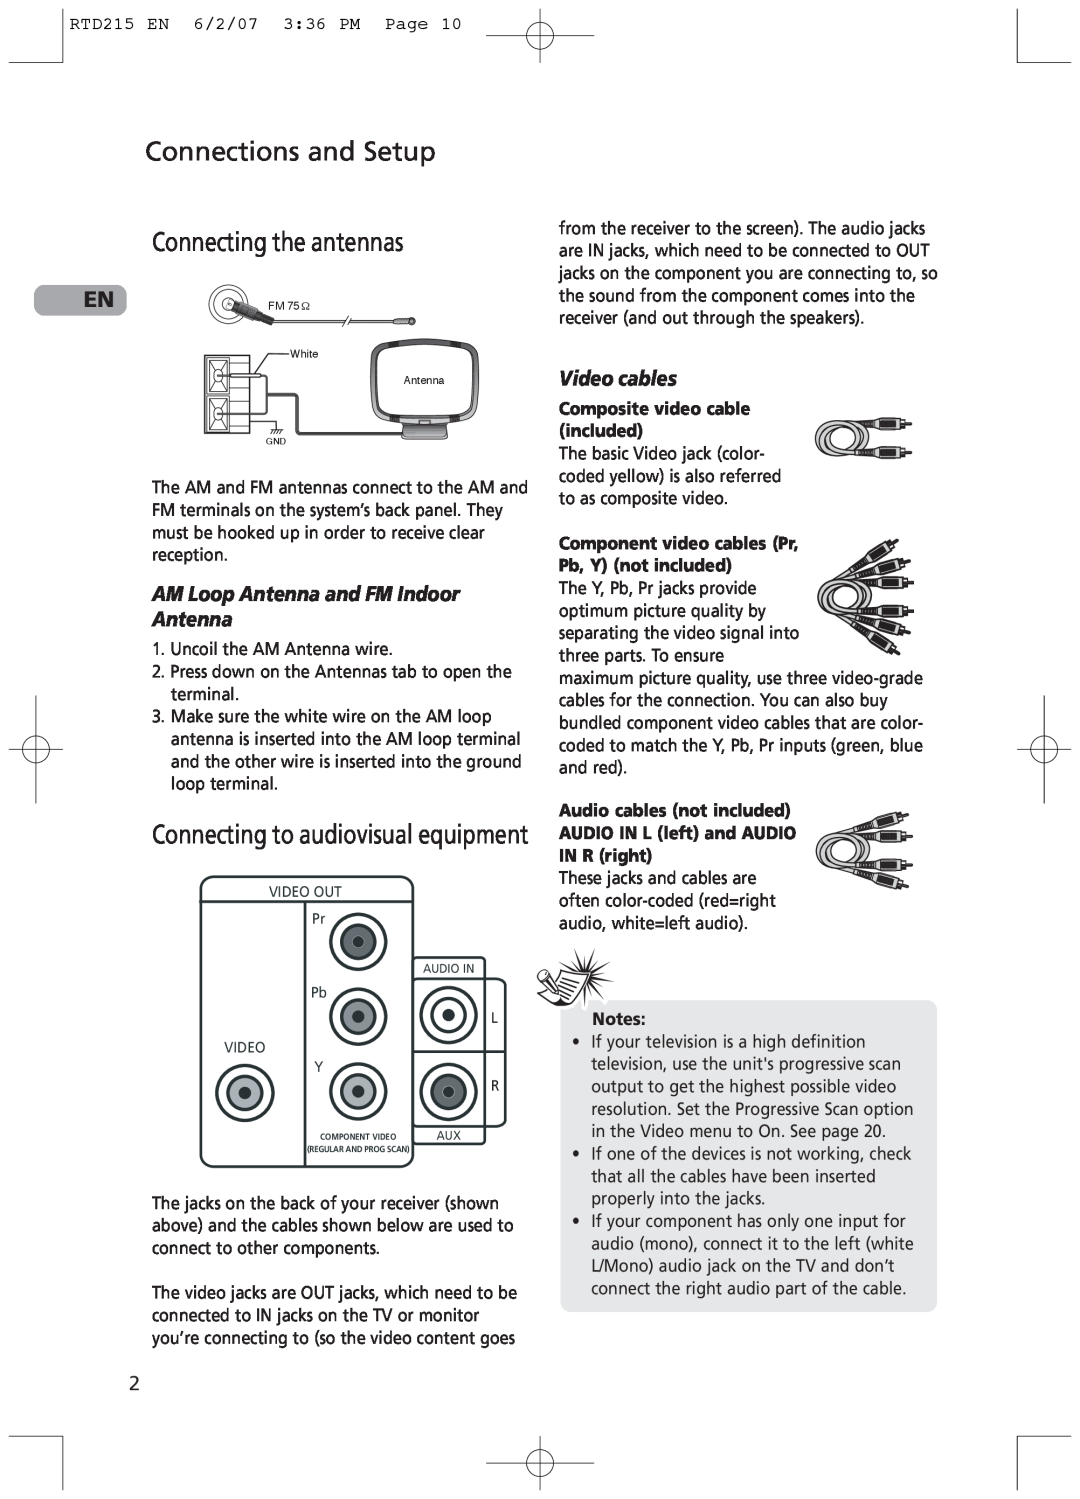 RCA RTD215 user manual Connections and Setup Connecting the antennas, Connecting to audiovisual equipment, Video cables 